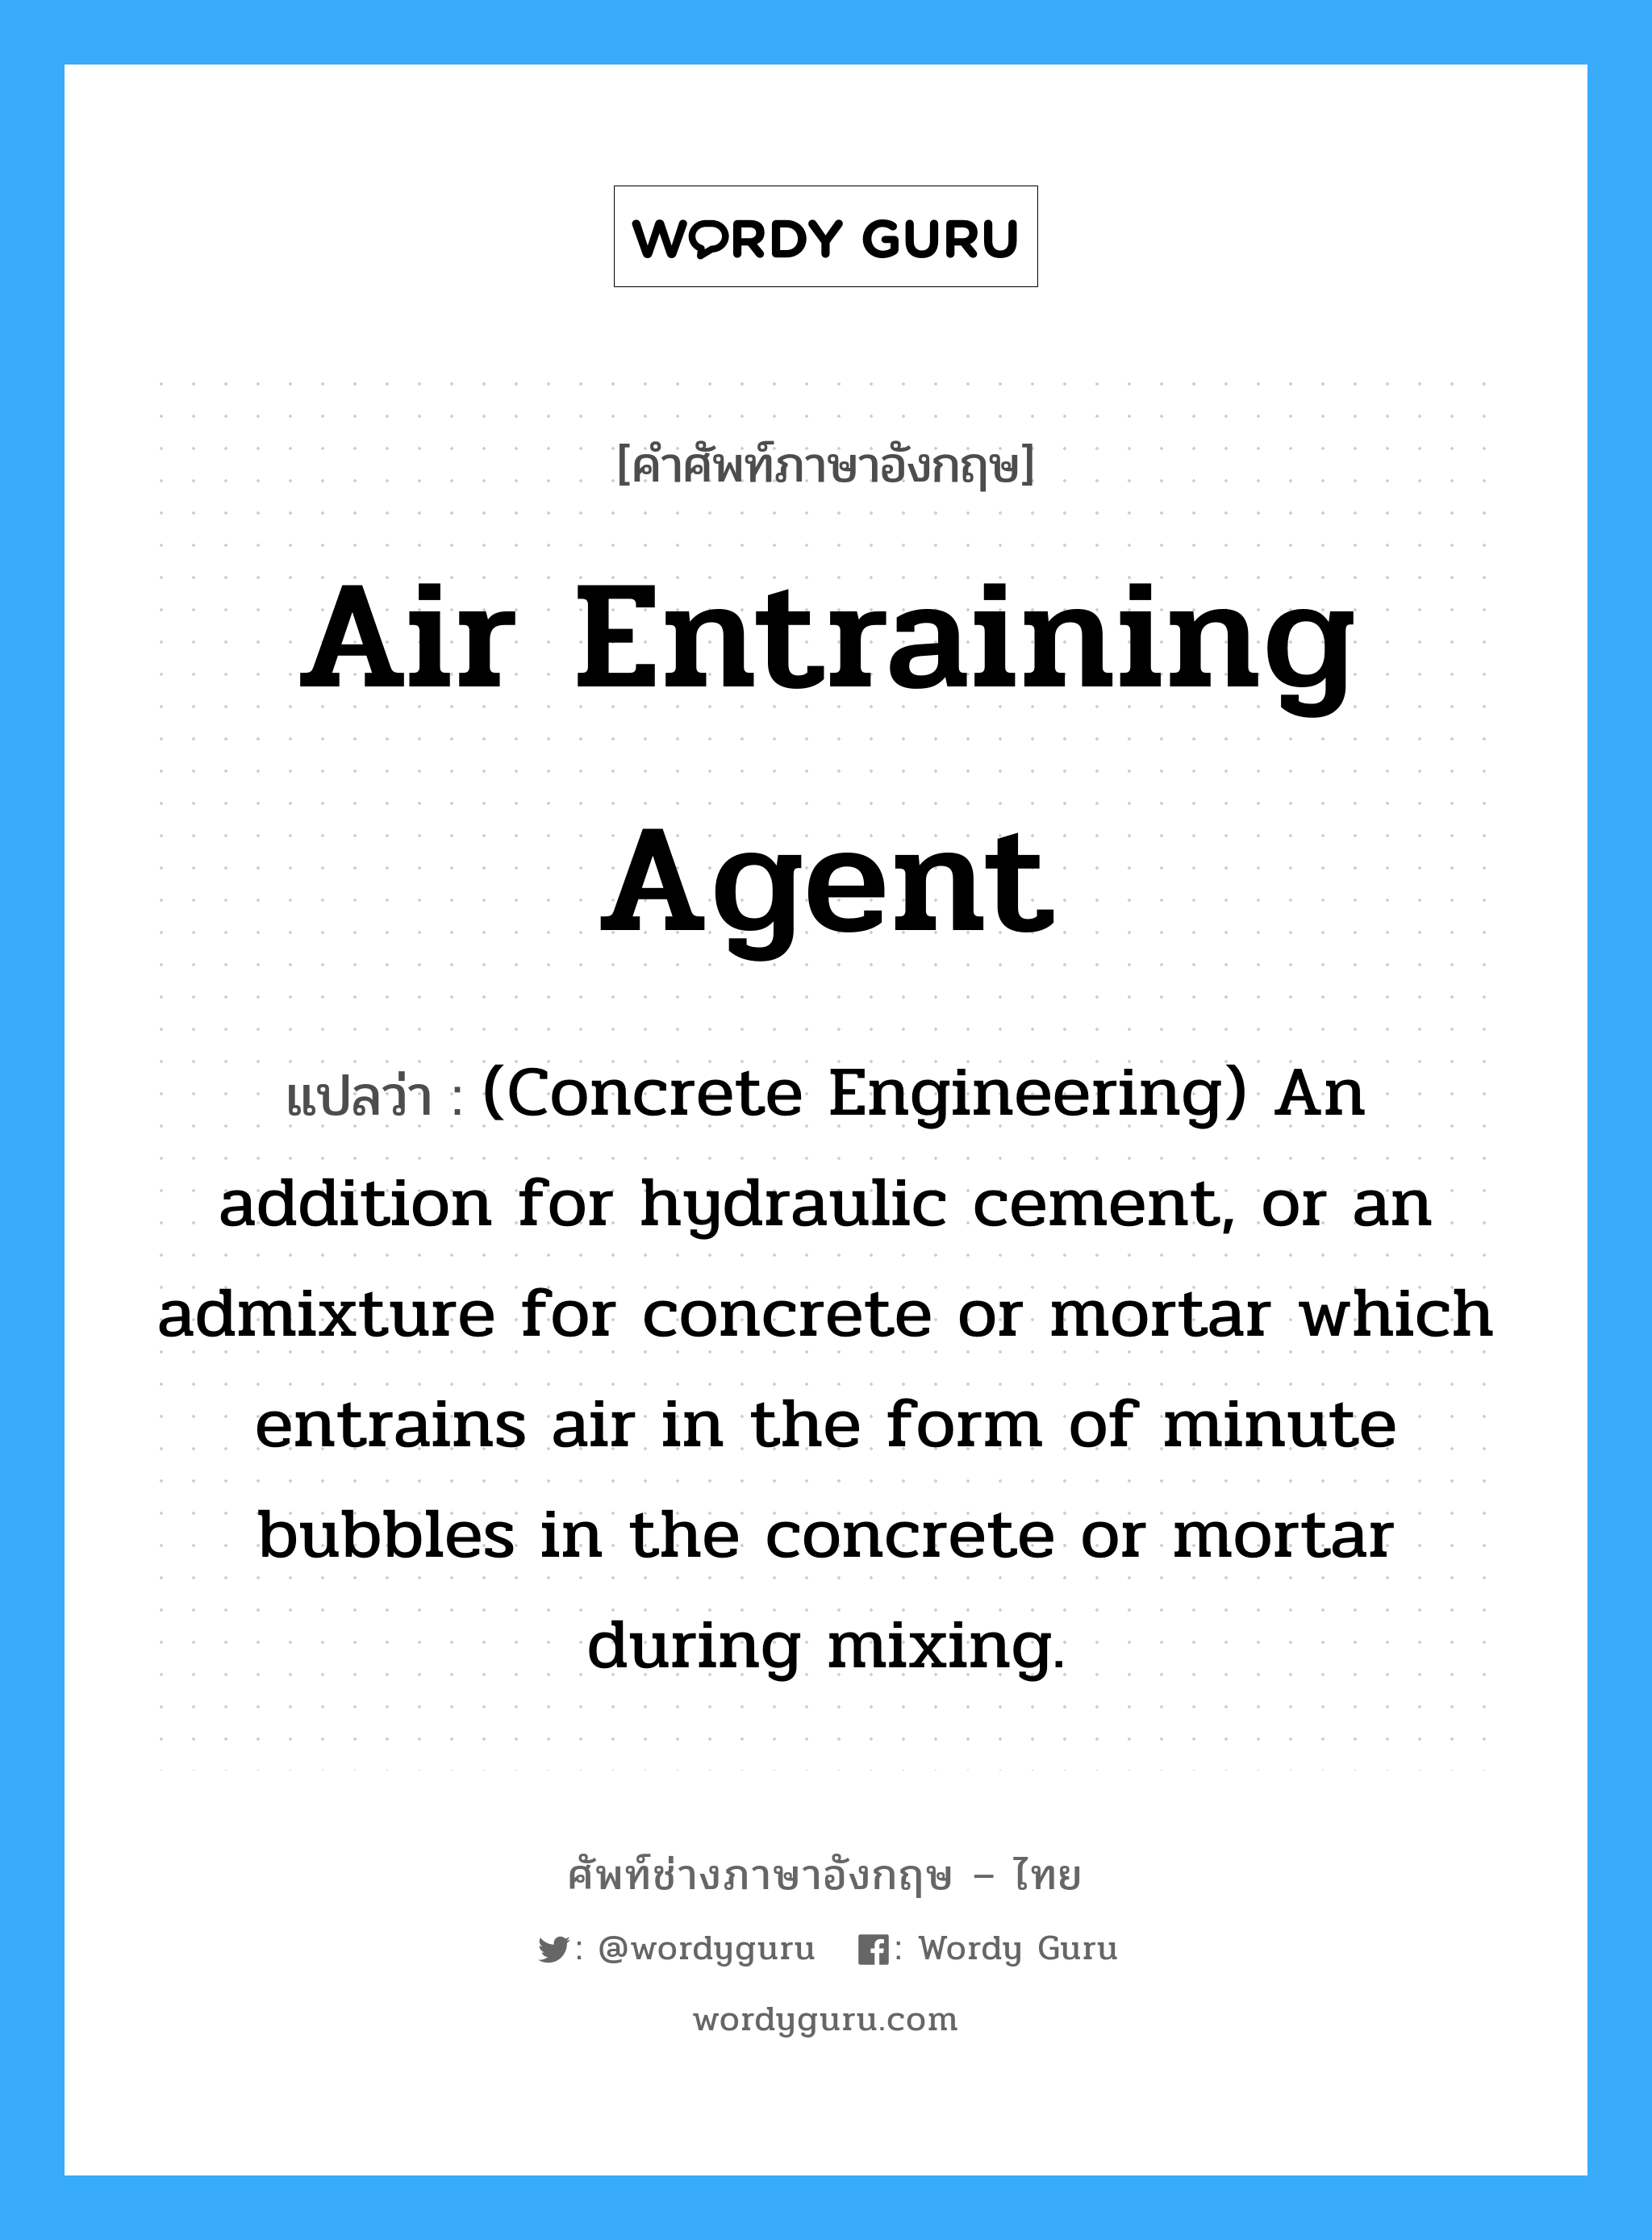 Air Entraining Agent แปลว่า?, คำศัพท์ช่างภาษาอังกฤษ - ไทย Air Entraining Agent คำศัพท์ภาษาอังกฤษ Air Entraining Agent แปลว่า (Concrete Engineering) An addition for hydraulic cement, or an admixture for concrete or mortar which entrains air in the form of minute bubbles in the concrete or mortar during mixing.